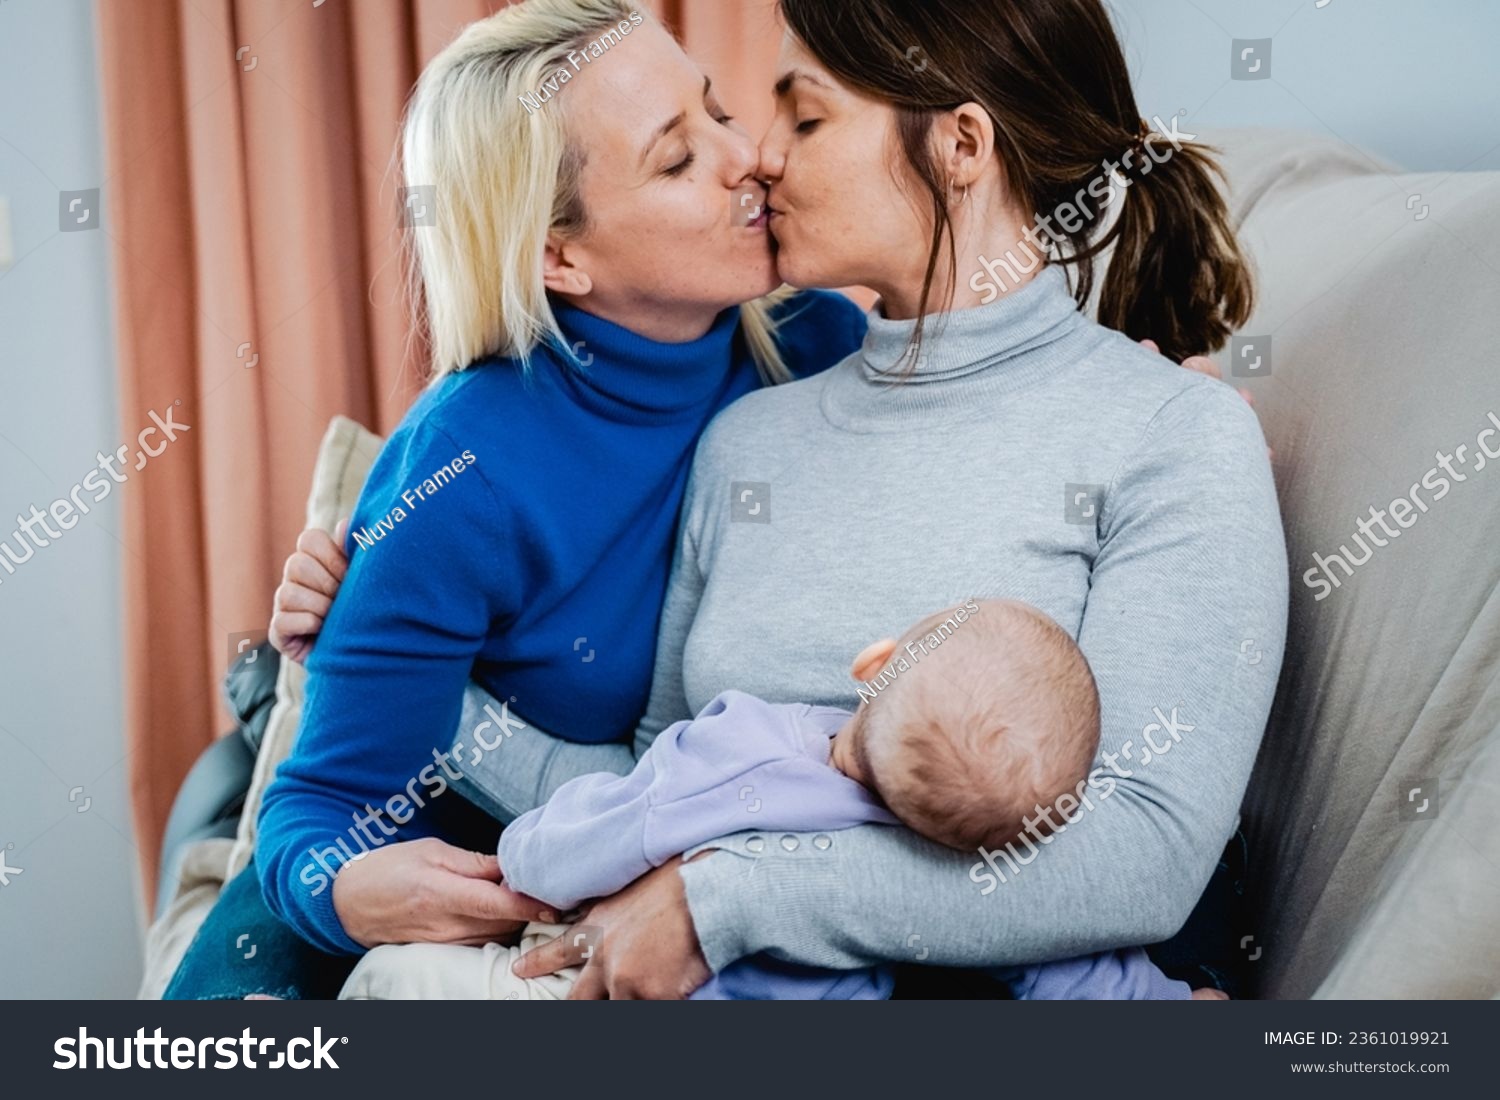 barry nefdt recommends lesbian mother daughter pics pic